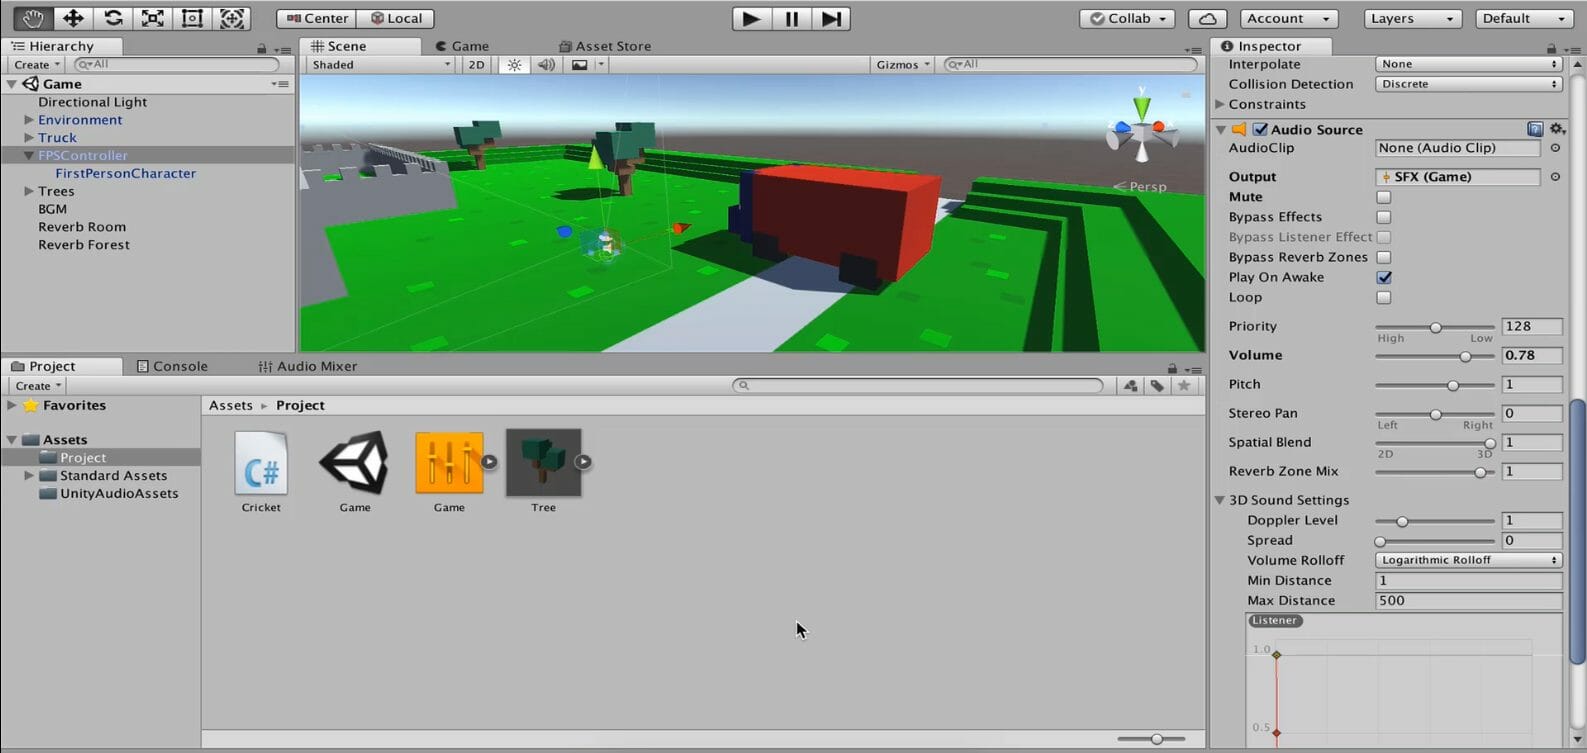 Screenshot of a Unity game engine project for an FPS experience